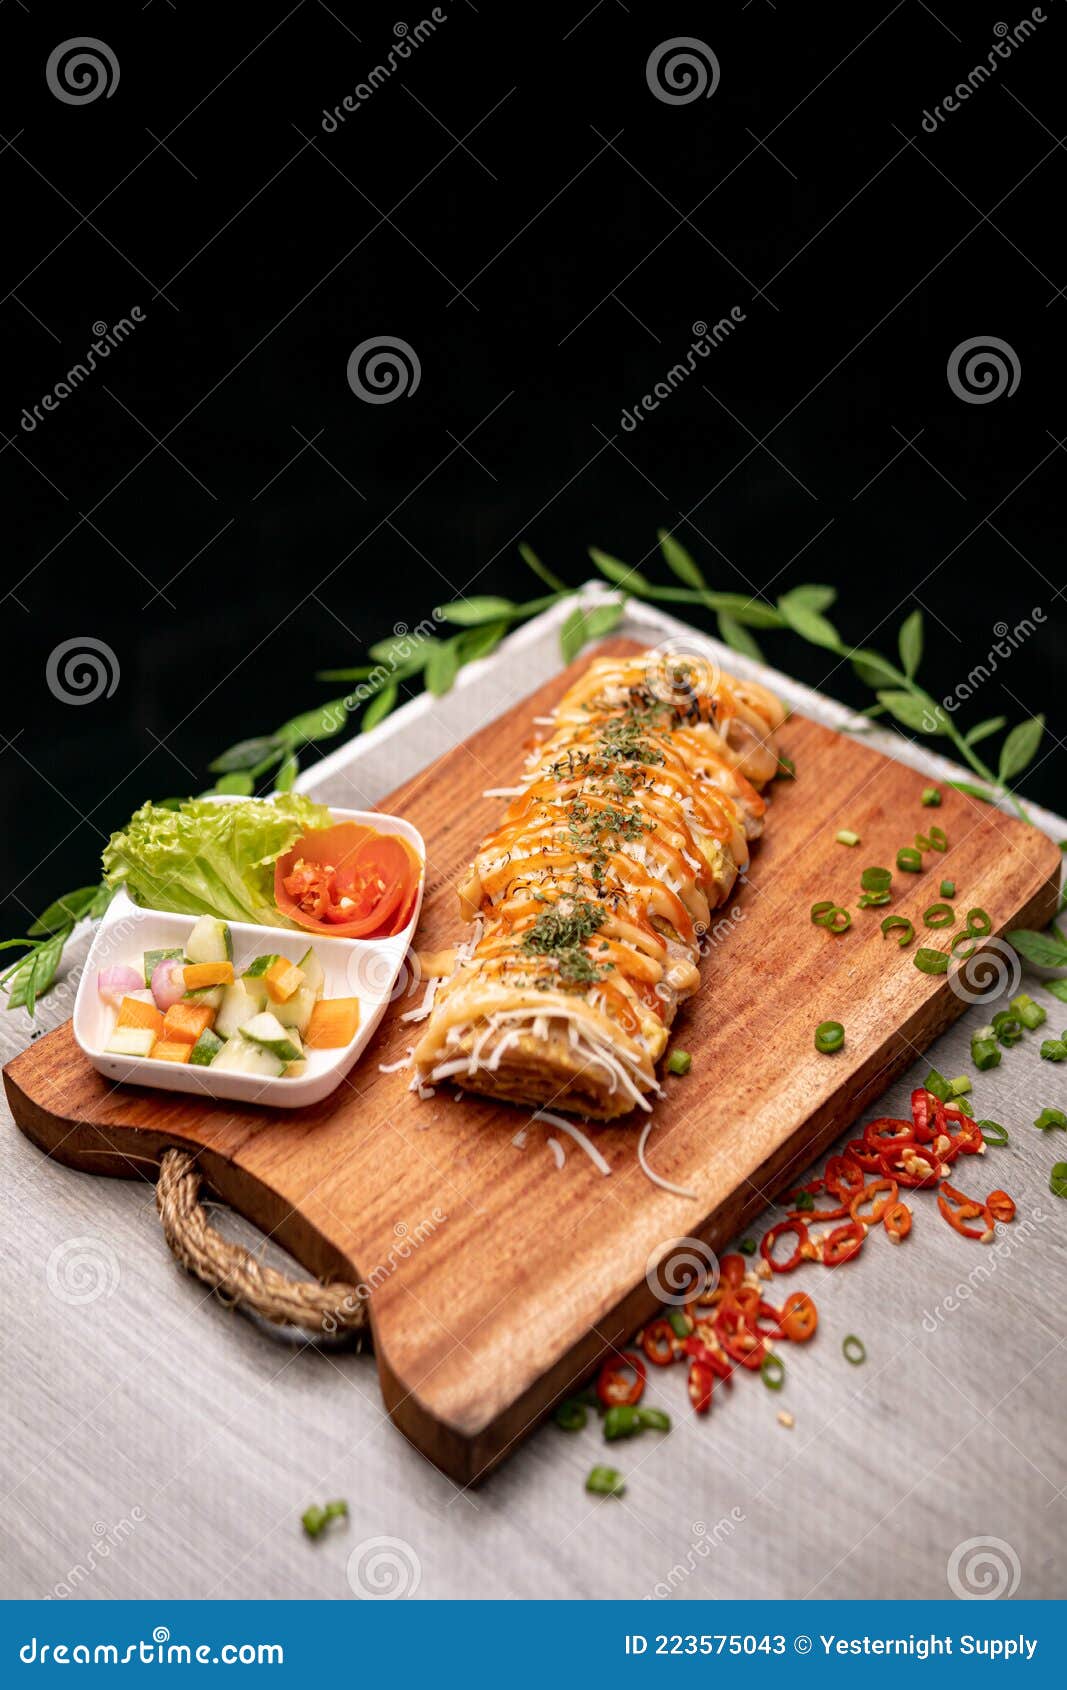 top side view of a fancy eggroll with herbs, spices and vegetables on a chopping board